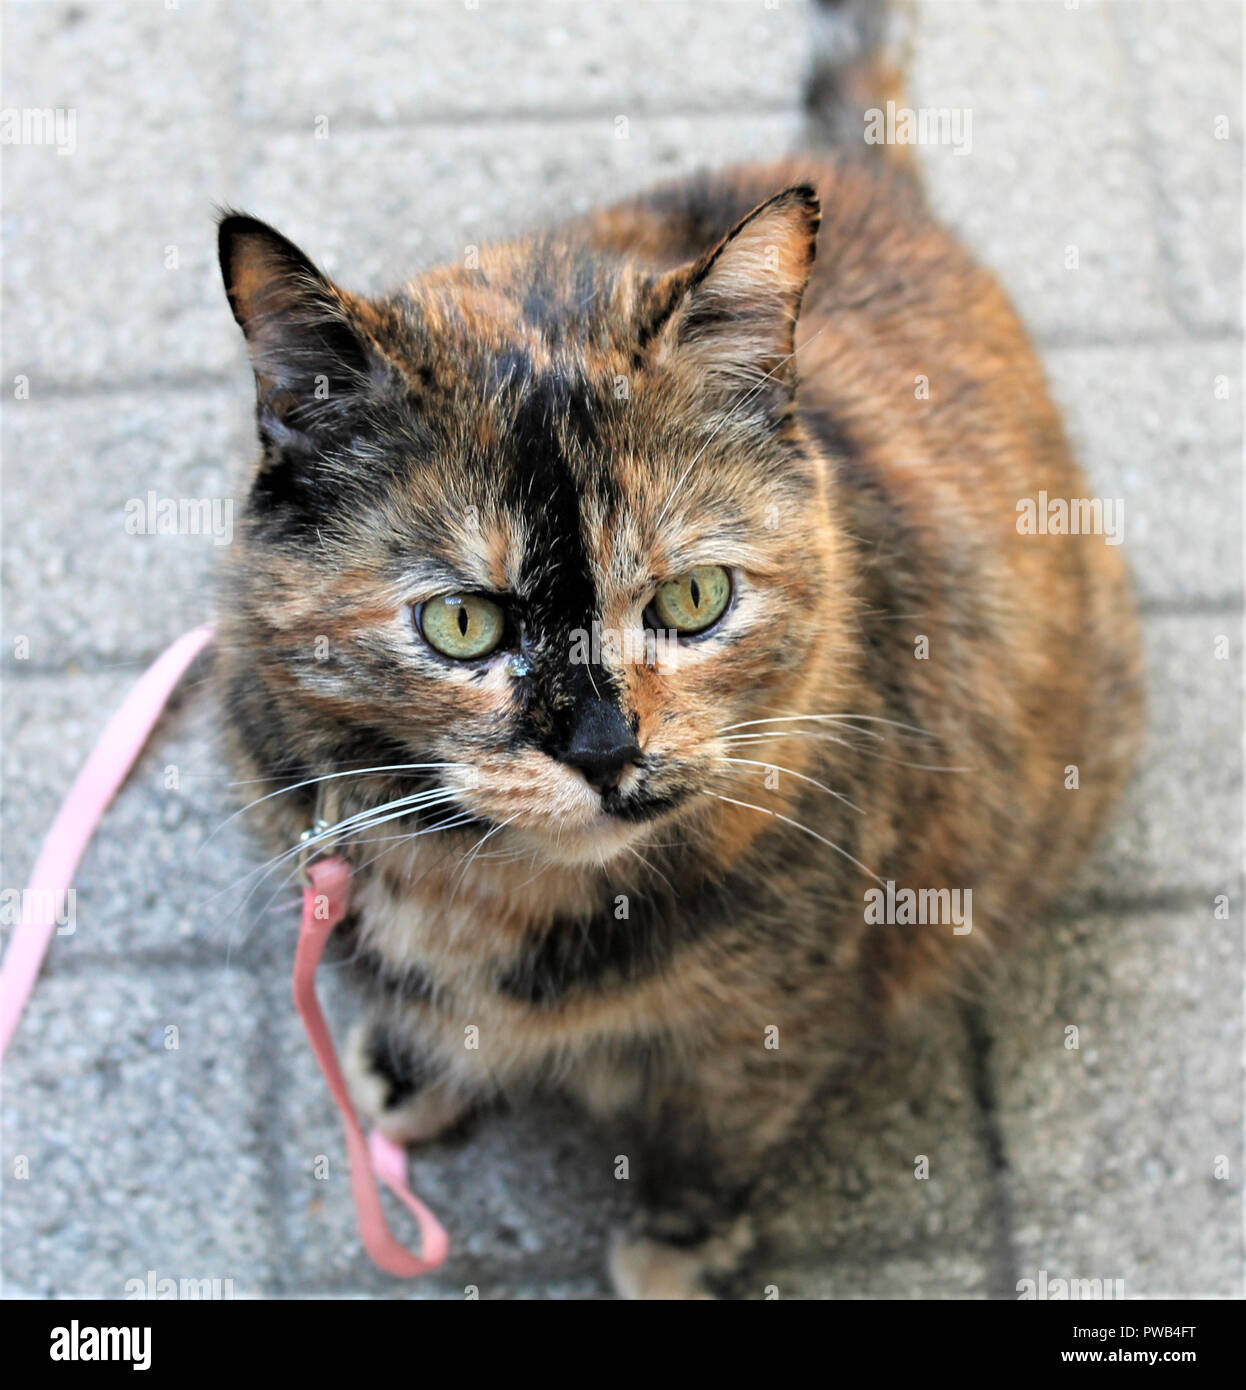 Female Tortoiseshell cat with green eyes and a pink leash sitting on patio stones. Stock Photo